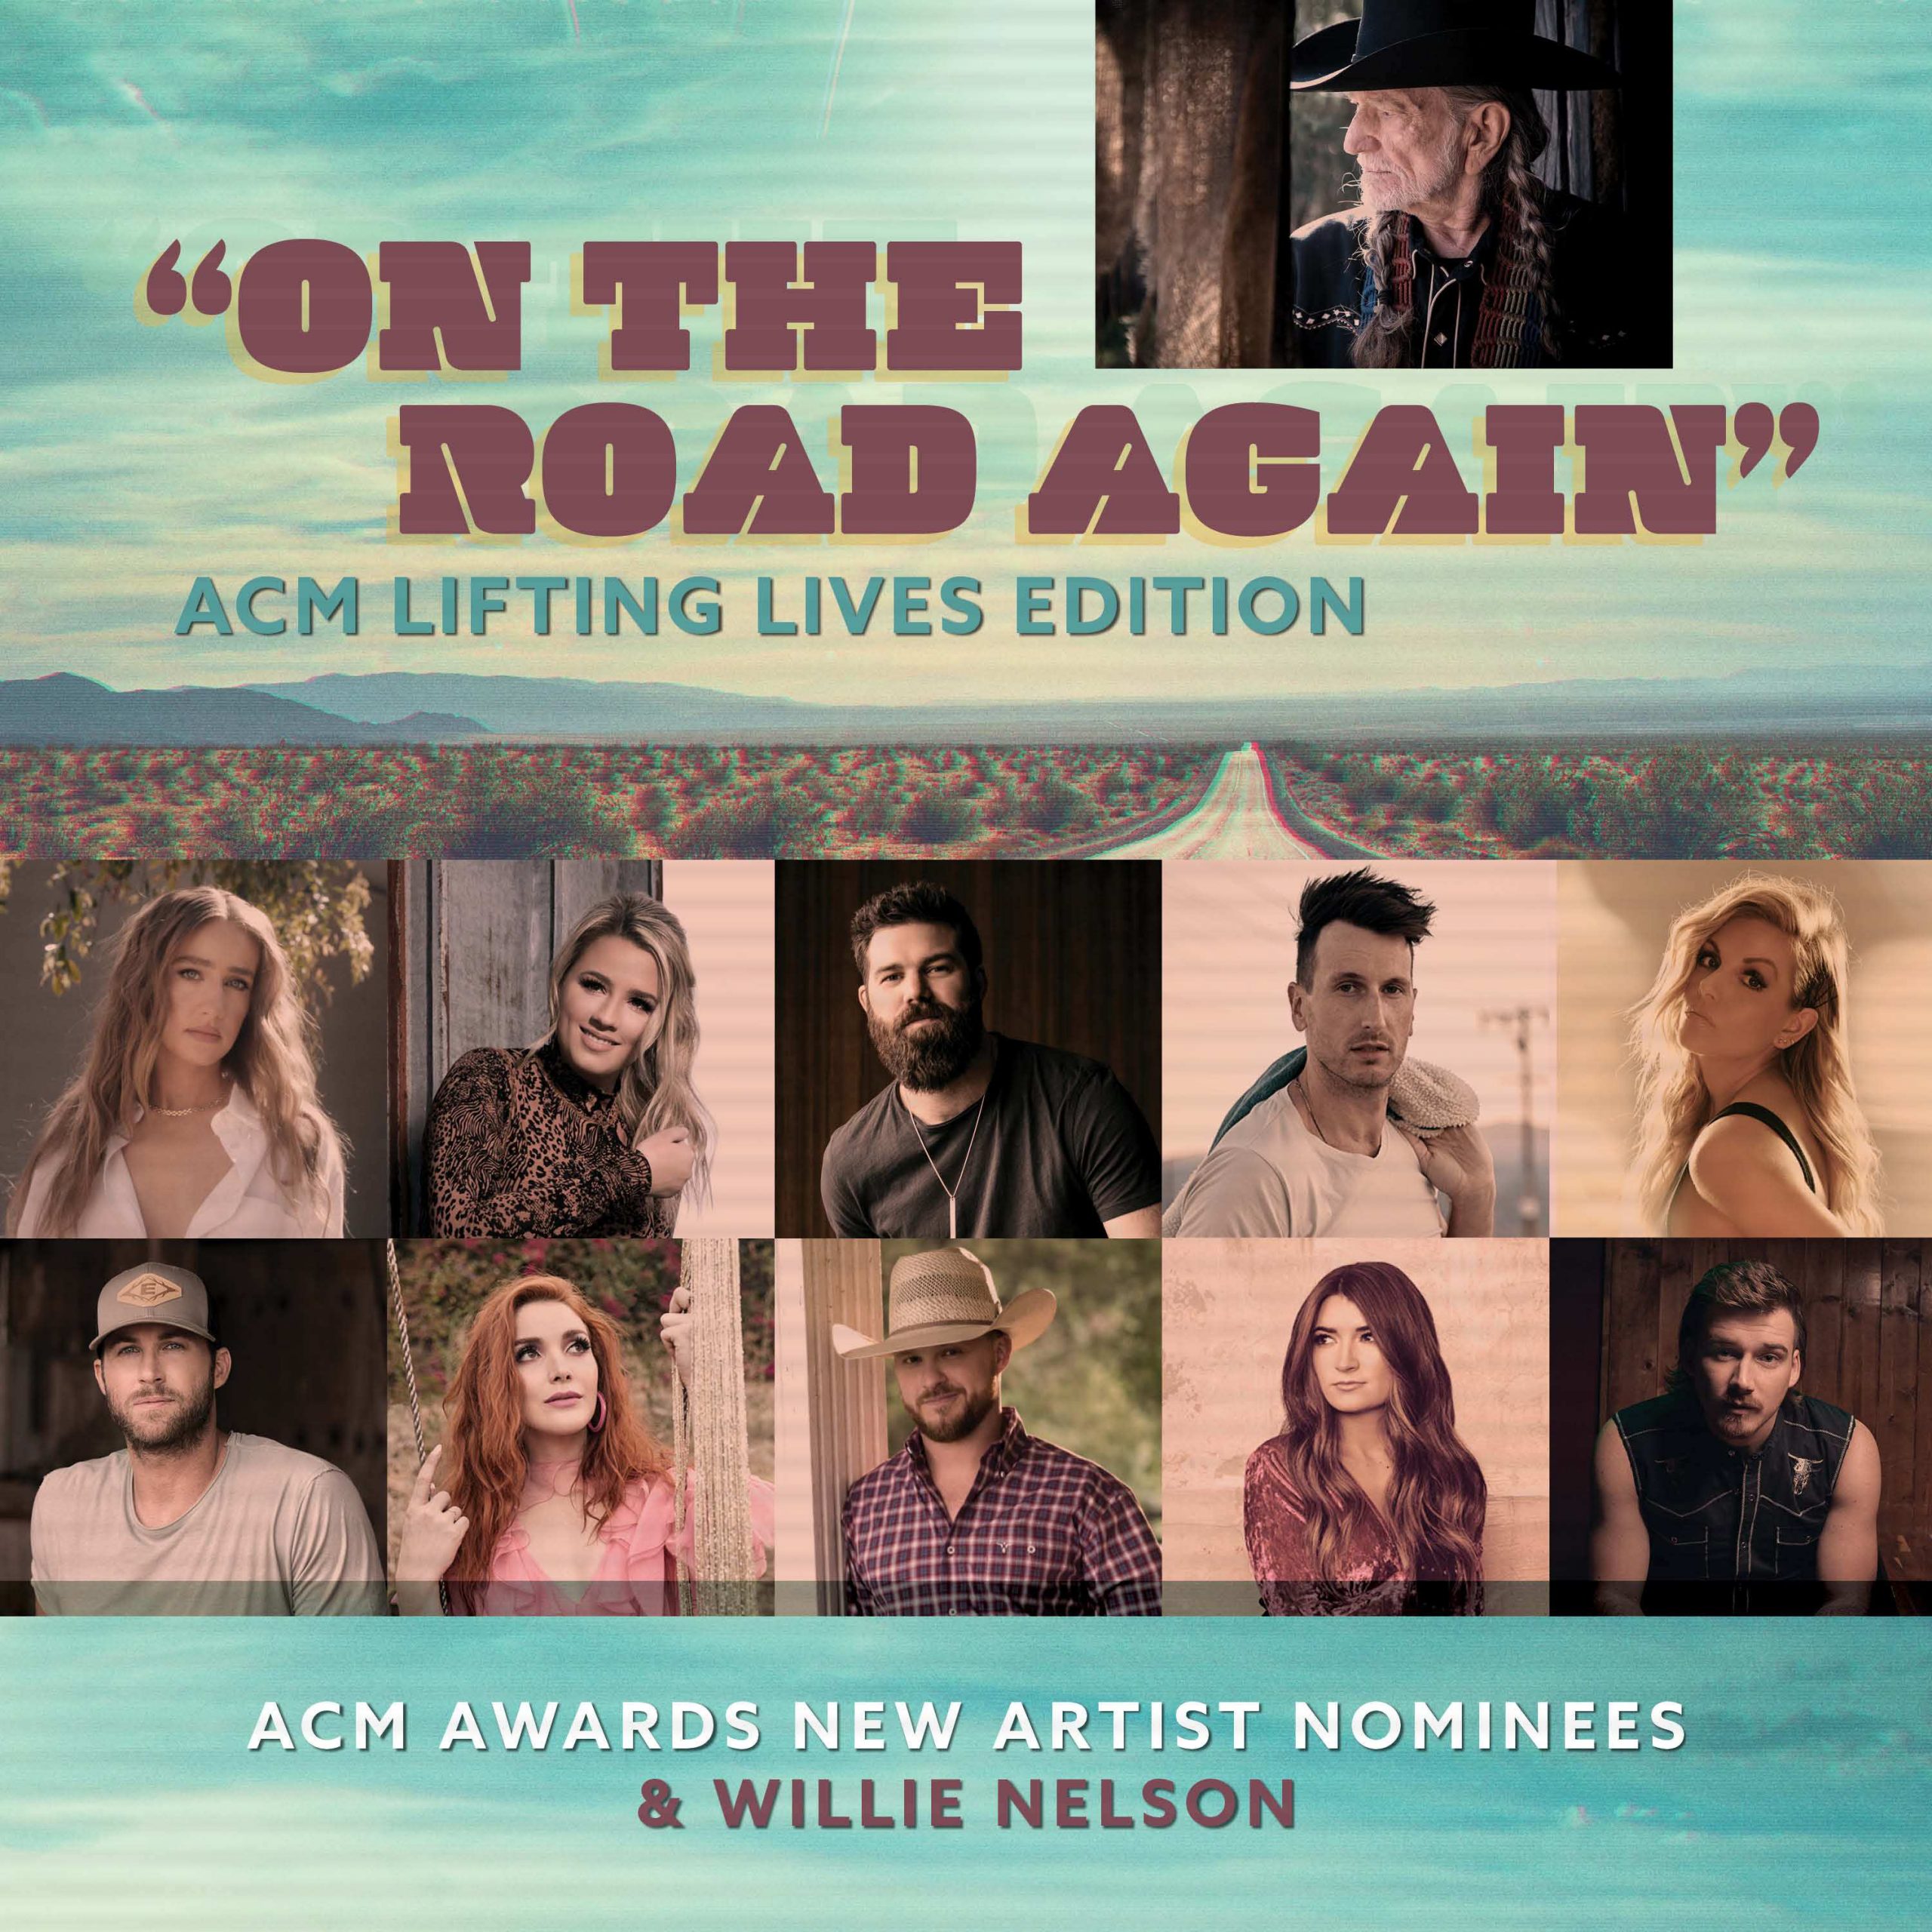 On the Road Again (ACM Lifting Lives Edition) - Willie Nelson (feat. Indrid Andress, Gabby Barrett, Jordan Davis, Russell Dickerson, Lindsay Ell, Riley Green, Caylee Hammack, Cody Johnson, Tenille Townes, and Morgan Wallen)